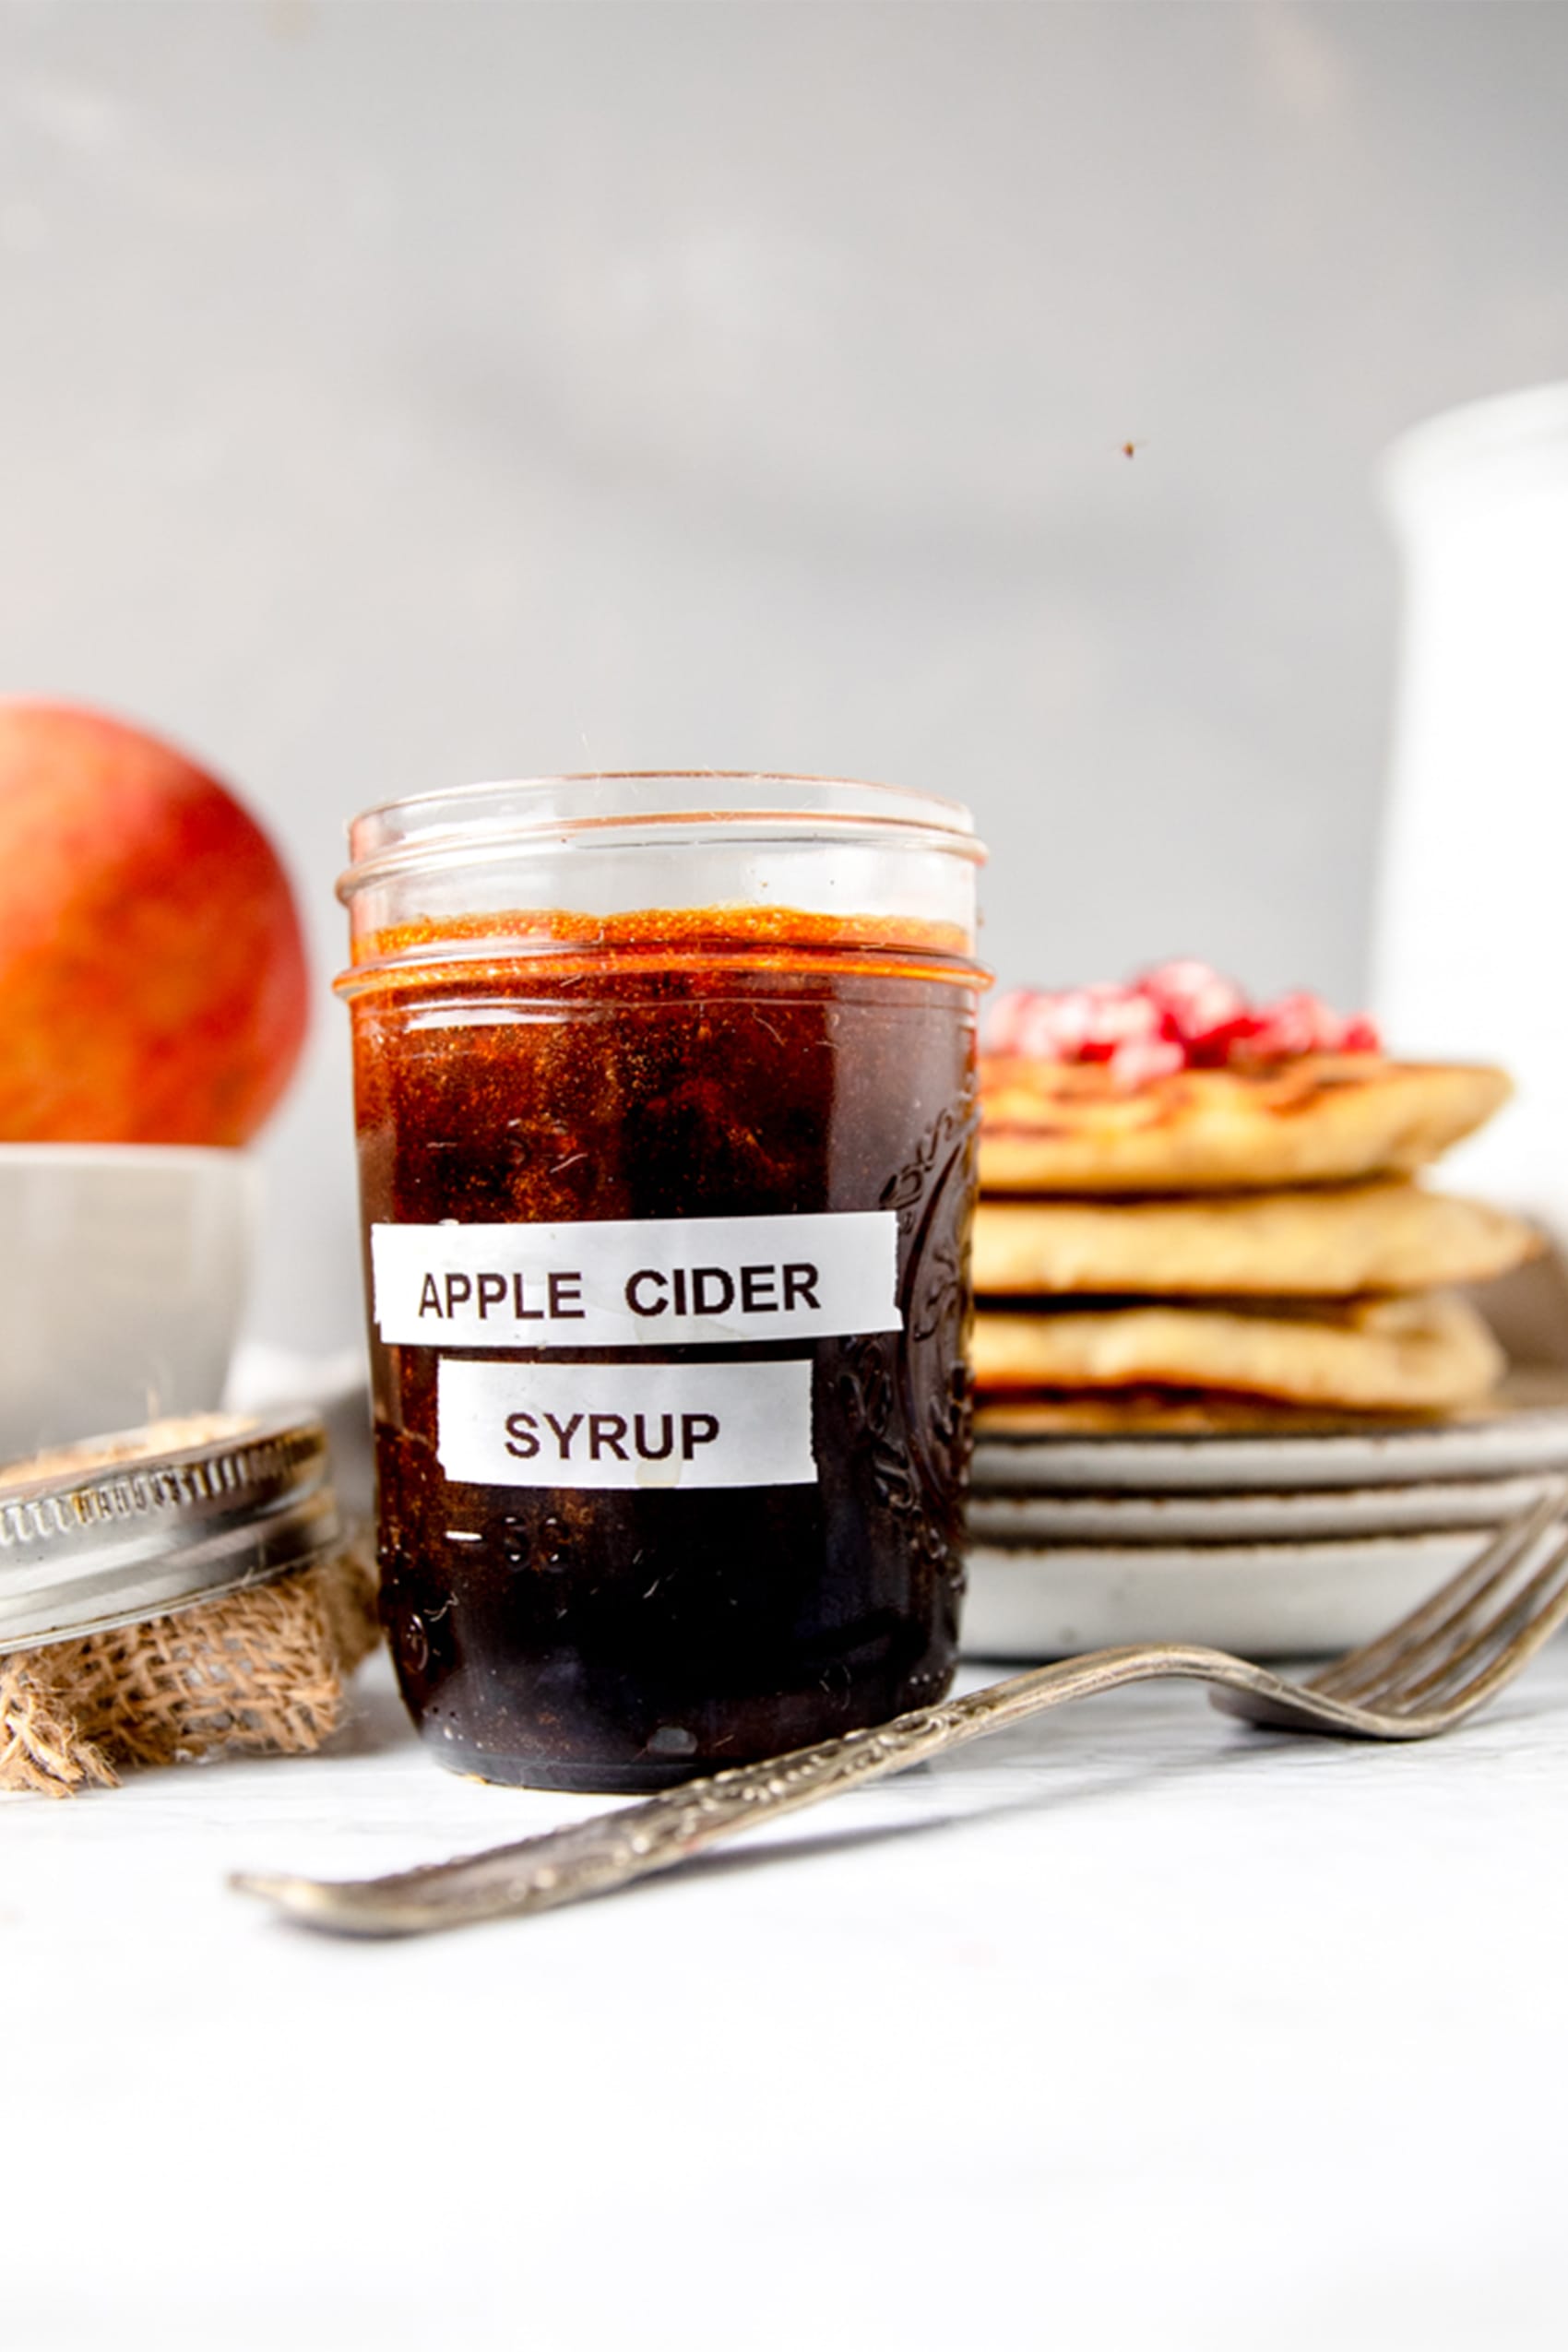 side view of glass ball jar labeled " apple cider syrup" next to an antique silver fork